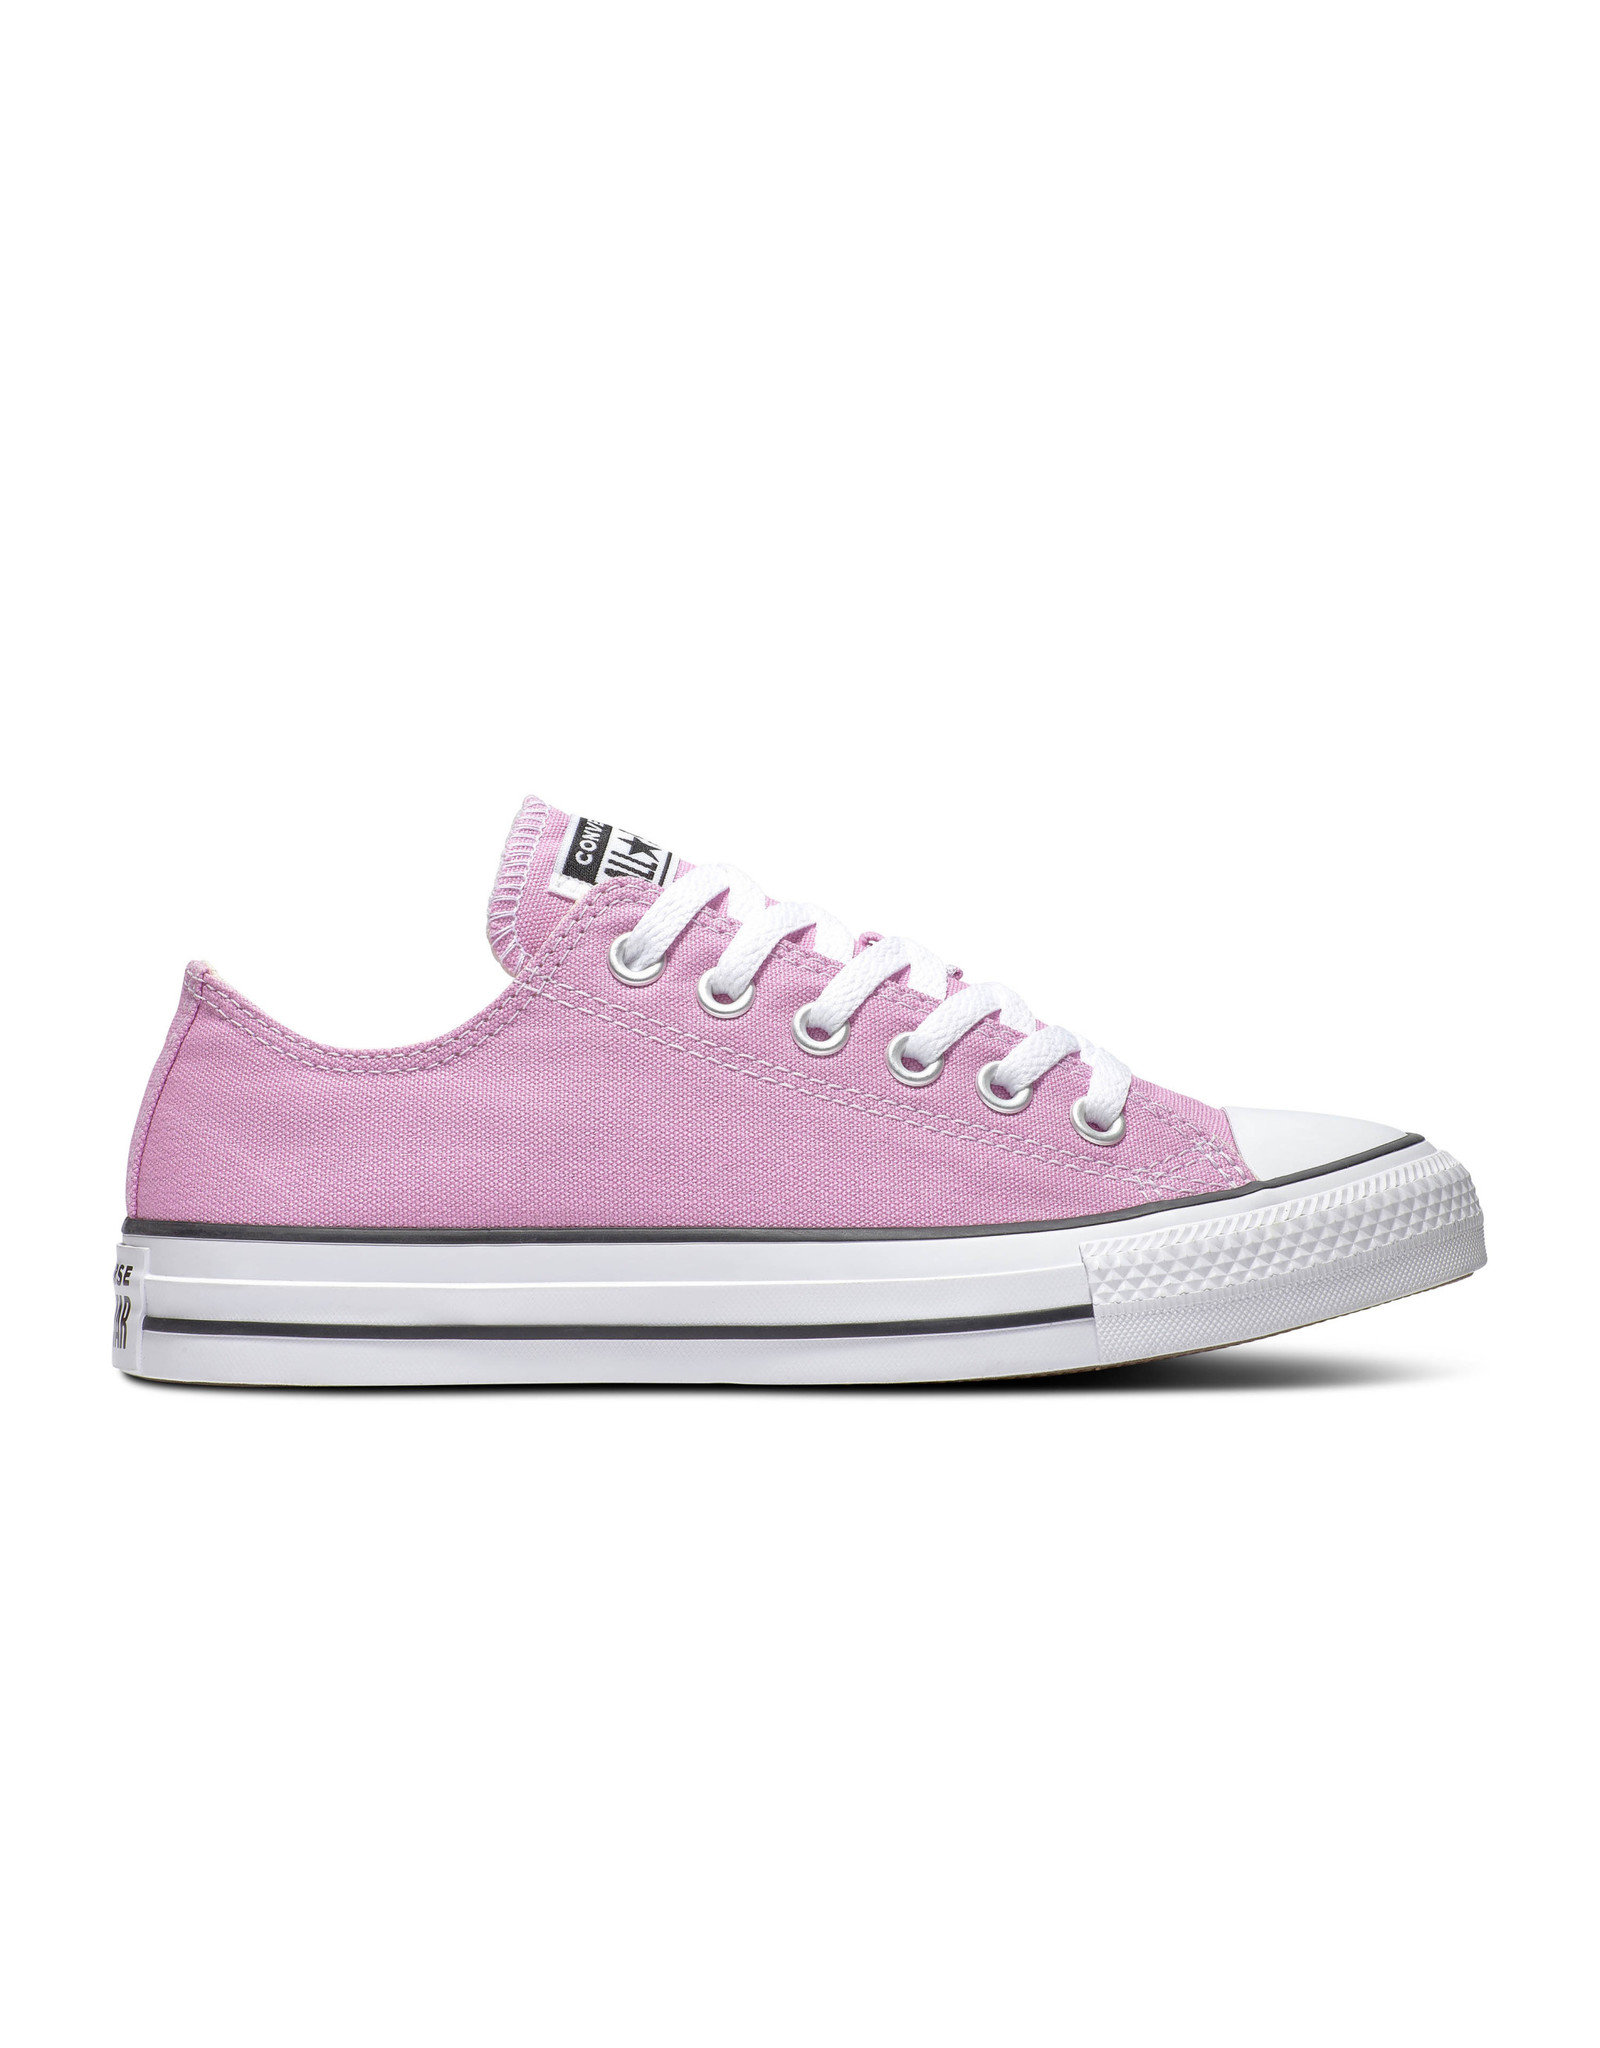 converse chuck taylor all star ox sneakers in pink